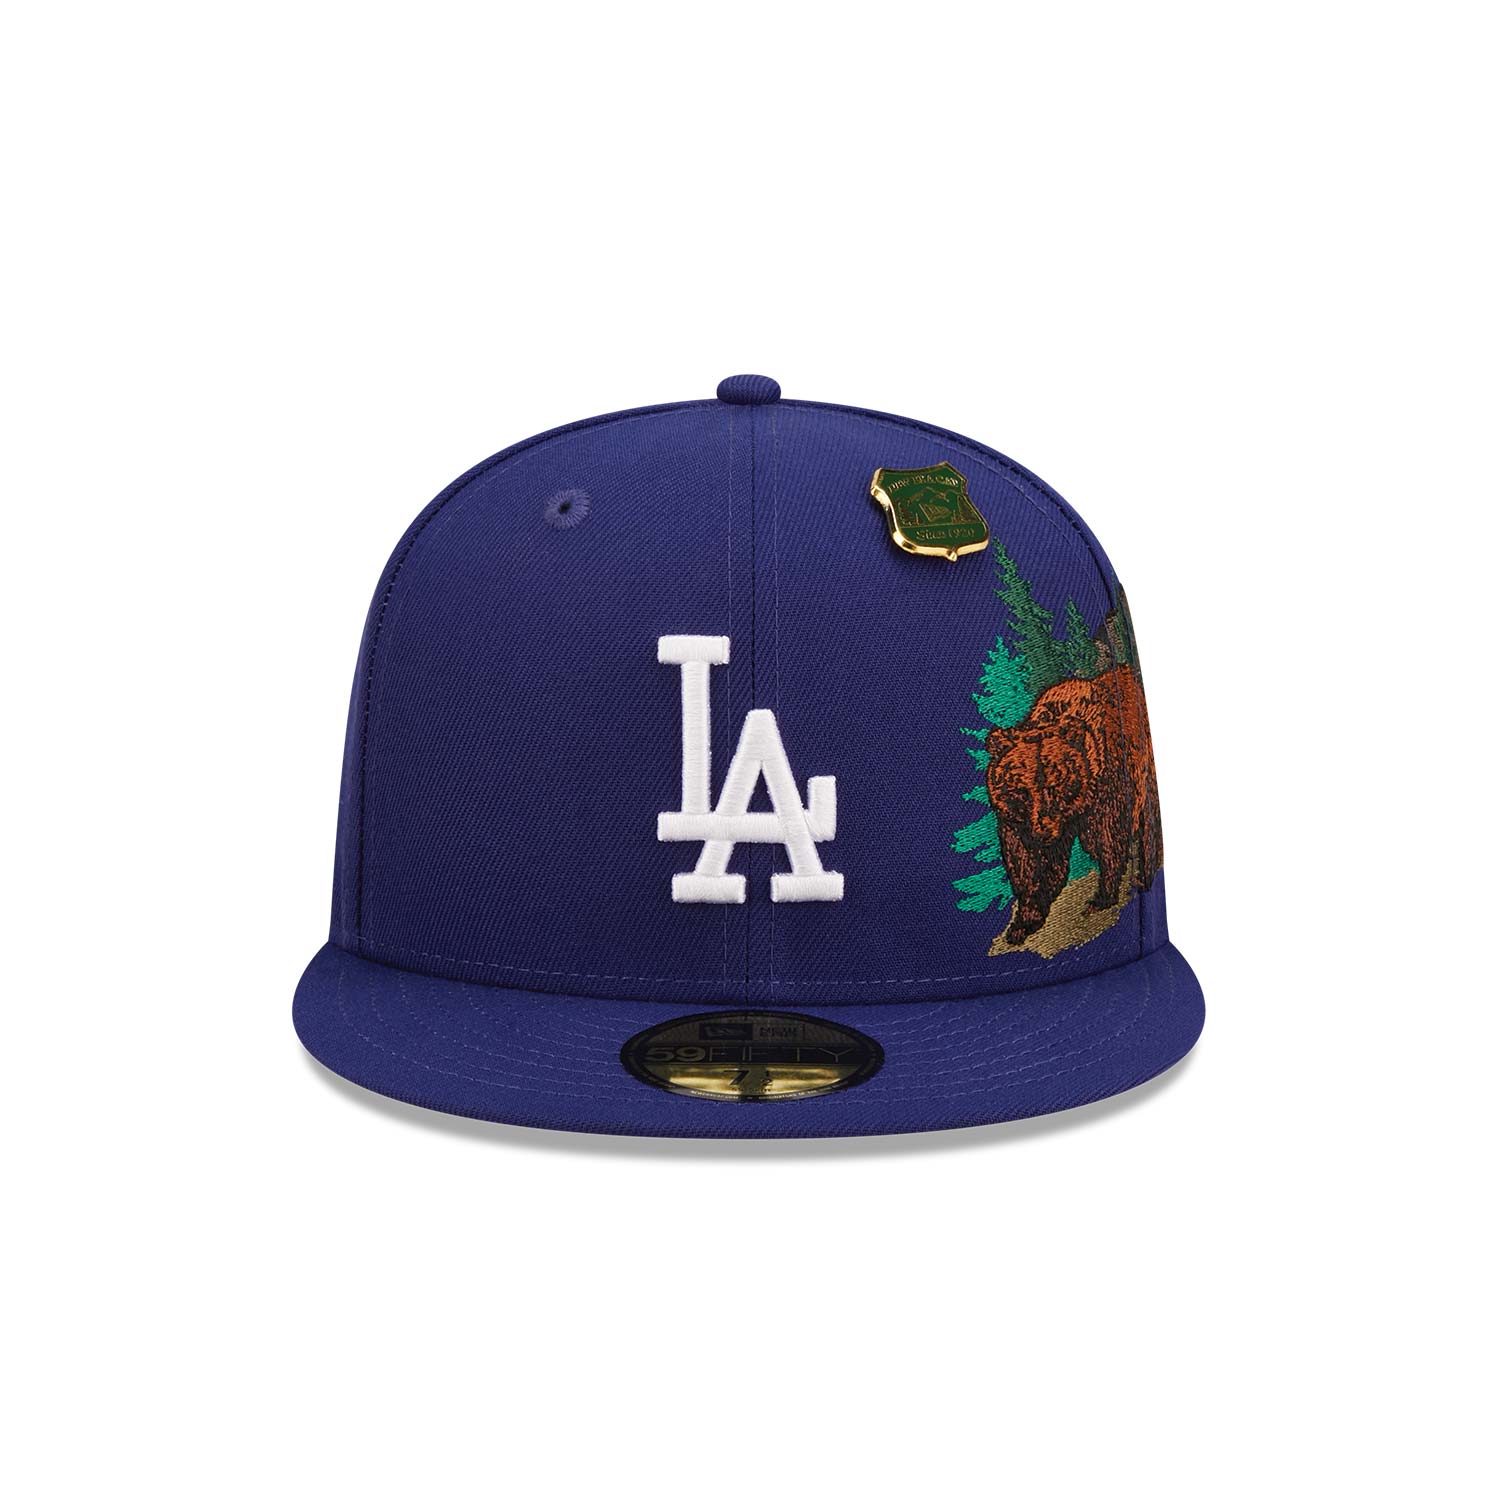 LA Dodgers State Park Dark Royal Blue 59FIFTY Fitted Cap